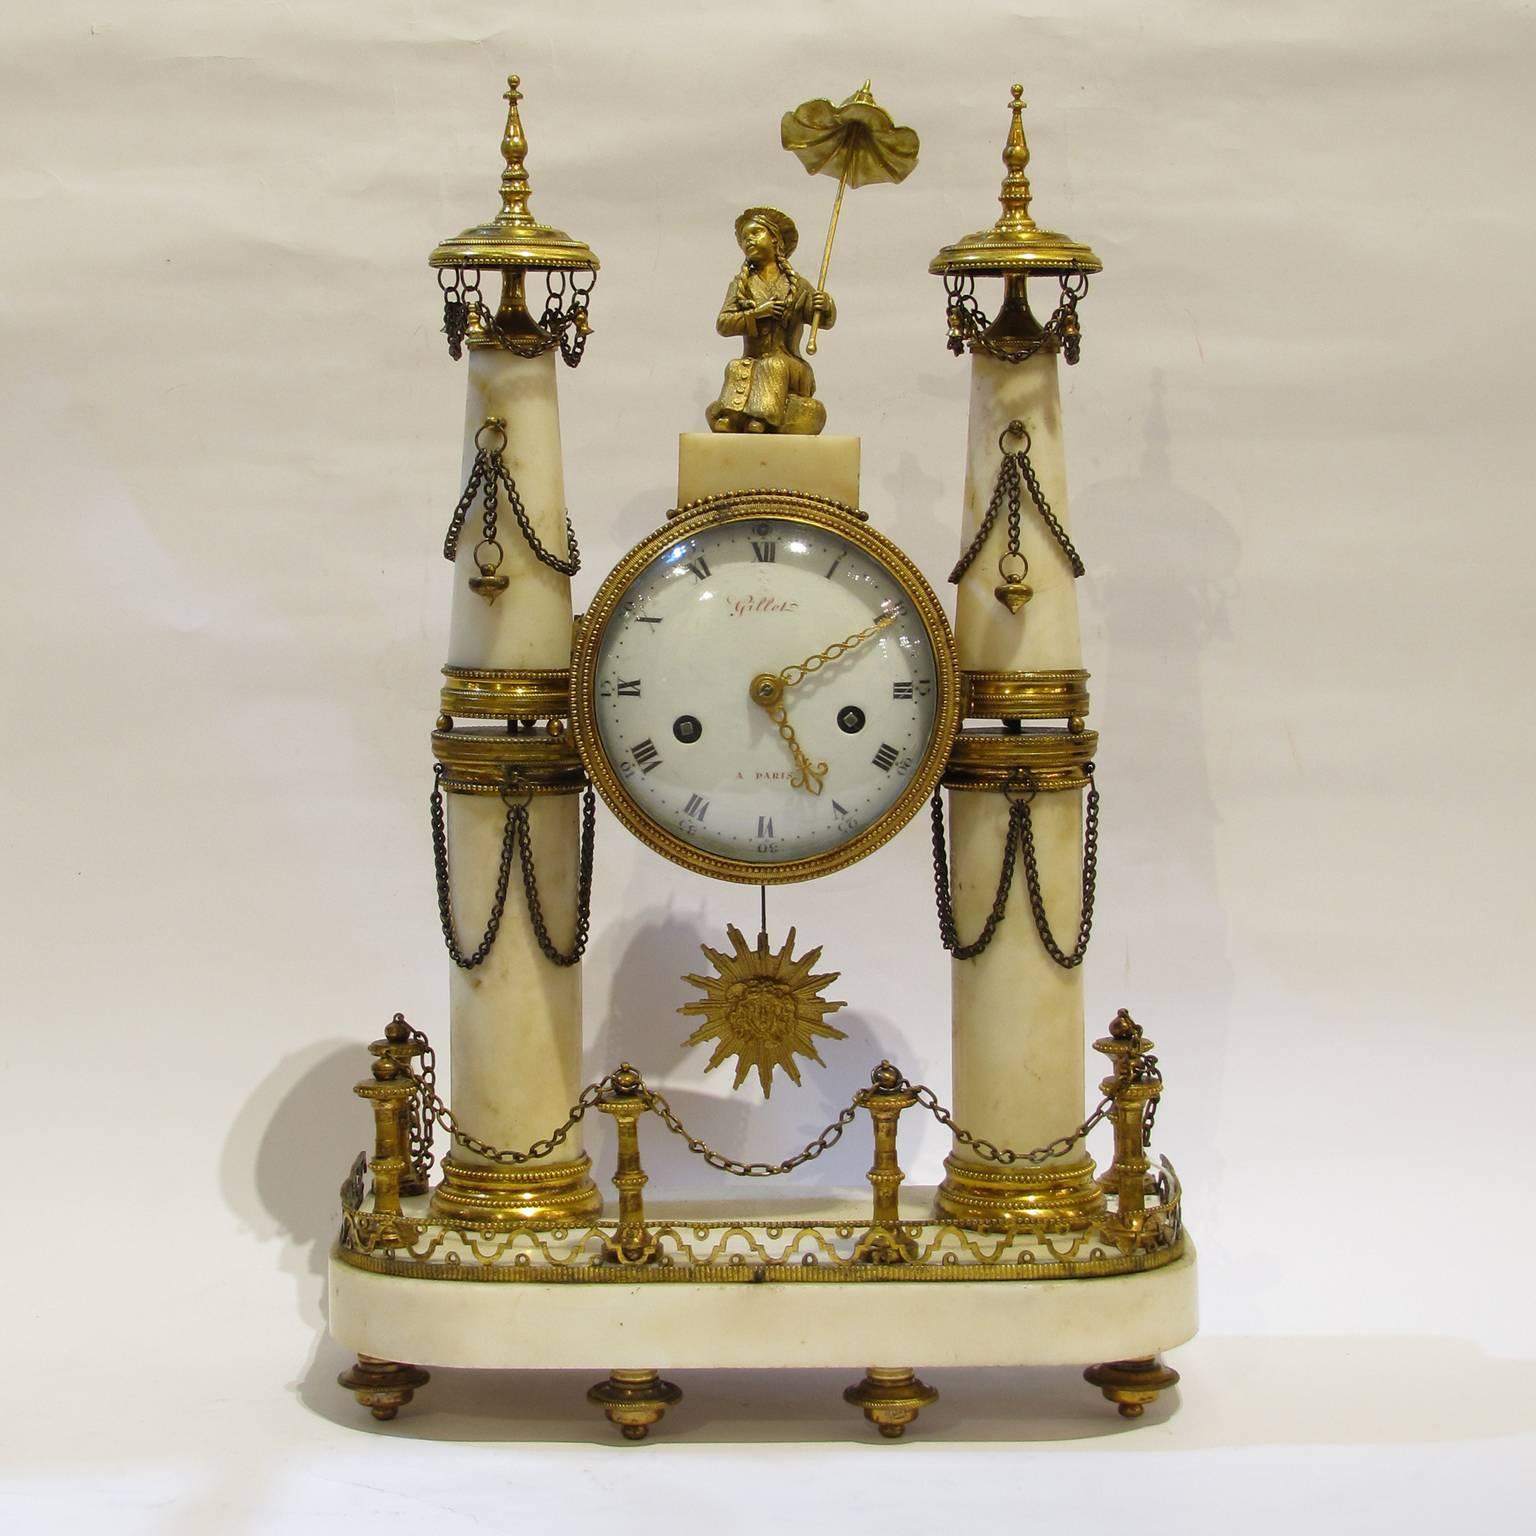 A superb pair Louis XVI ormolu-mounted and white Carrara marble mantel clocks with sunburst pendulum. Round marble columns on each side are supporting the cylindrical movement casing. The clocks do have a seven-day movement with anchor escapement,